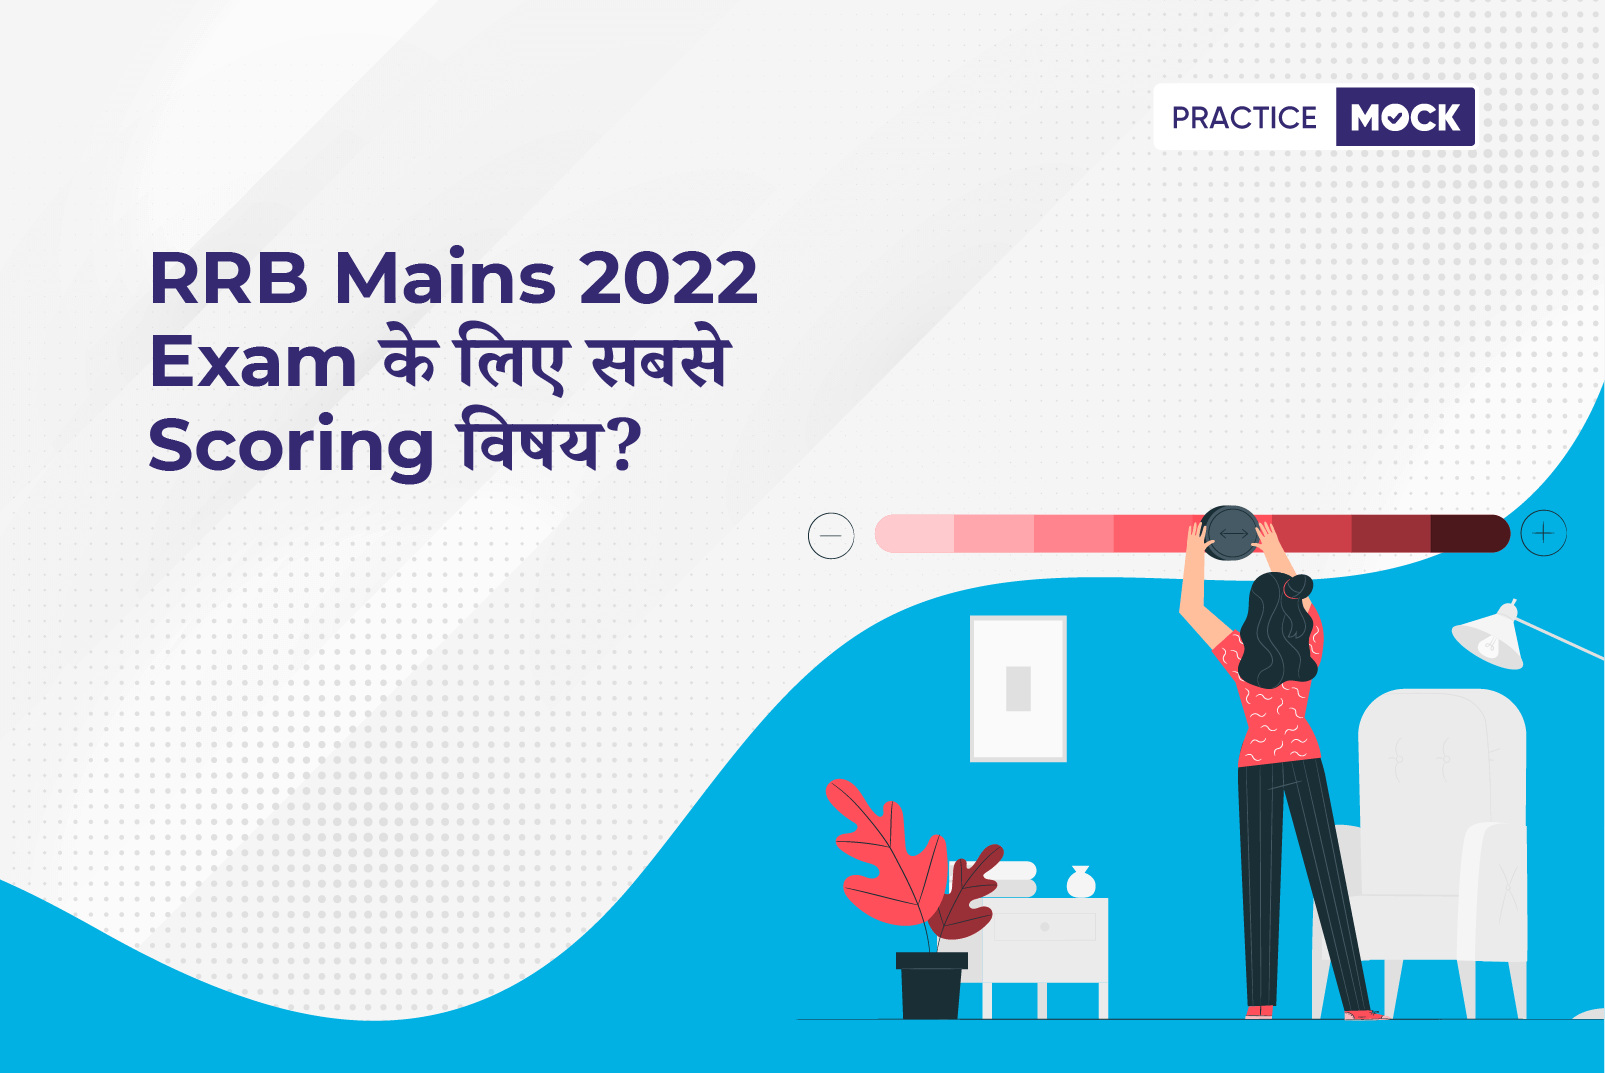 Most Scoring Topics for RRB Clerk Mains 2022 Exam